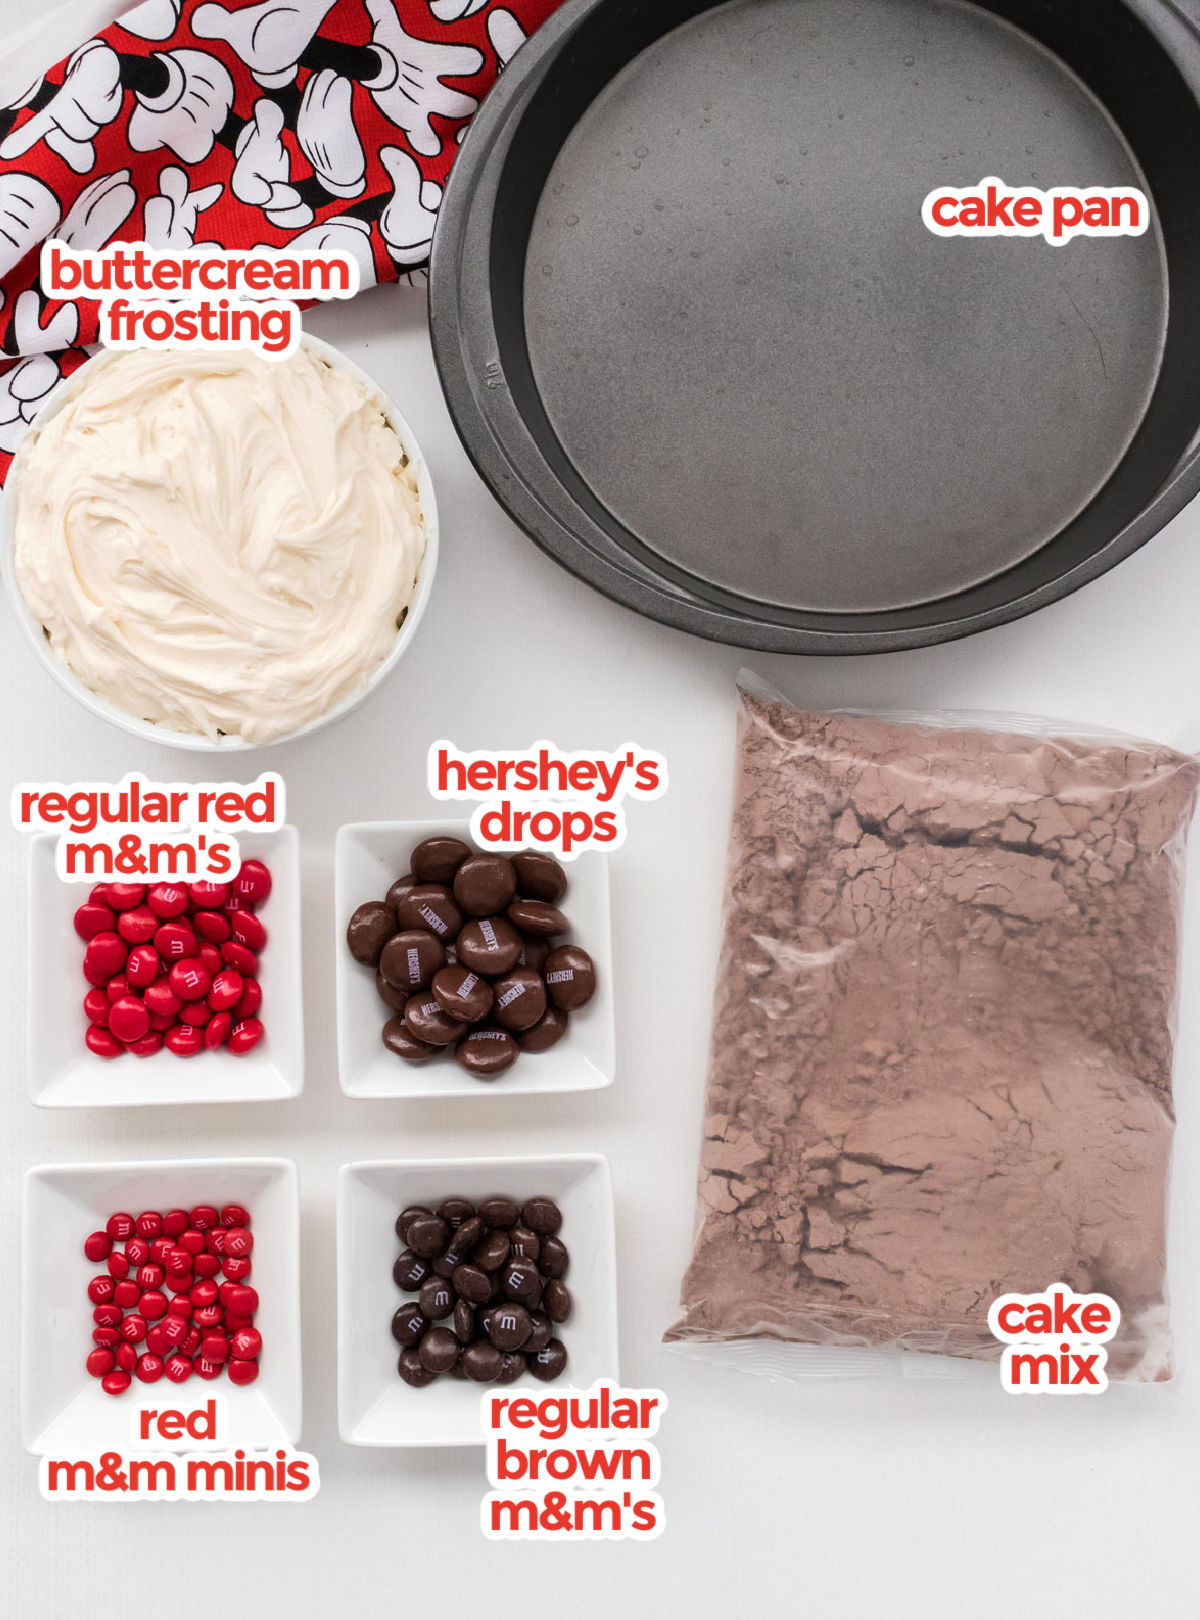 All the ingredients you will need to make an Easy Mickey Mouse Cake including cake mix, cake pans, buttercream frosting, Hershey's Chocolate Drops, Regular M&M's and M&M Minis.